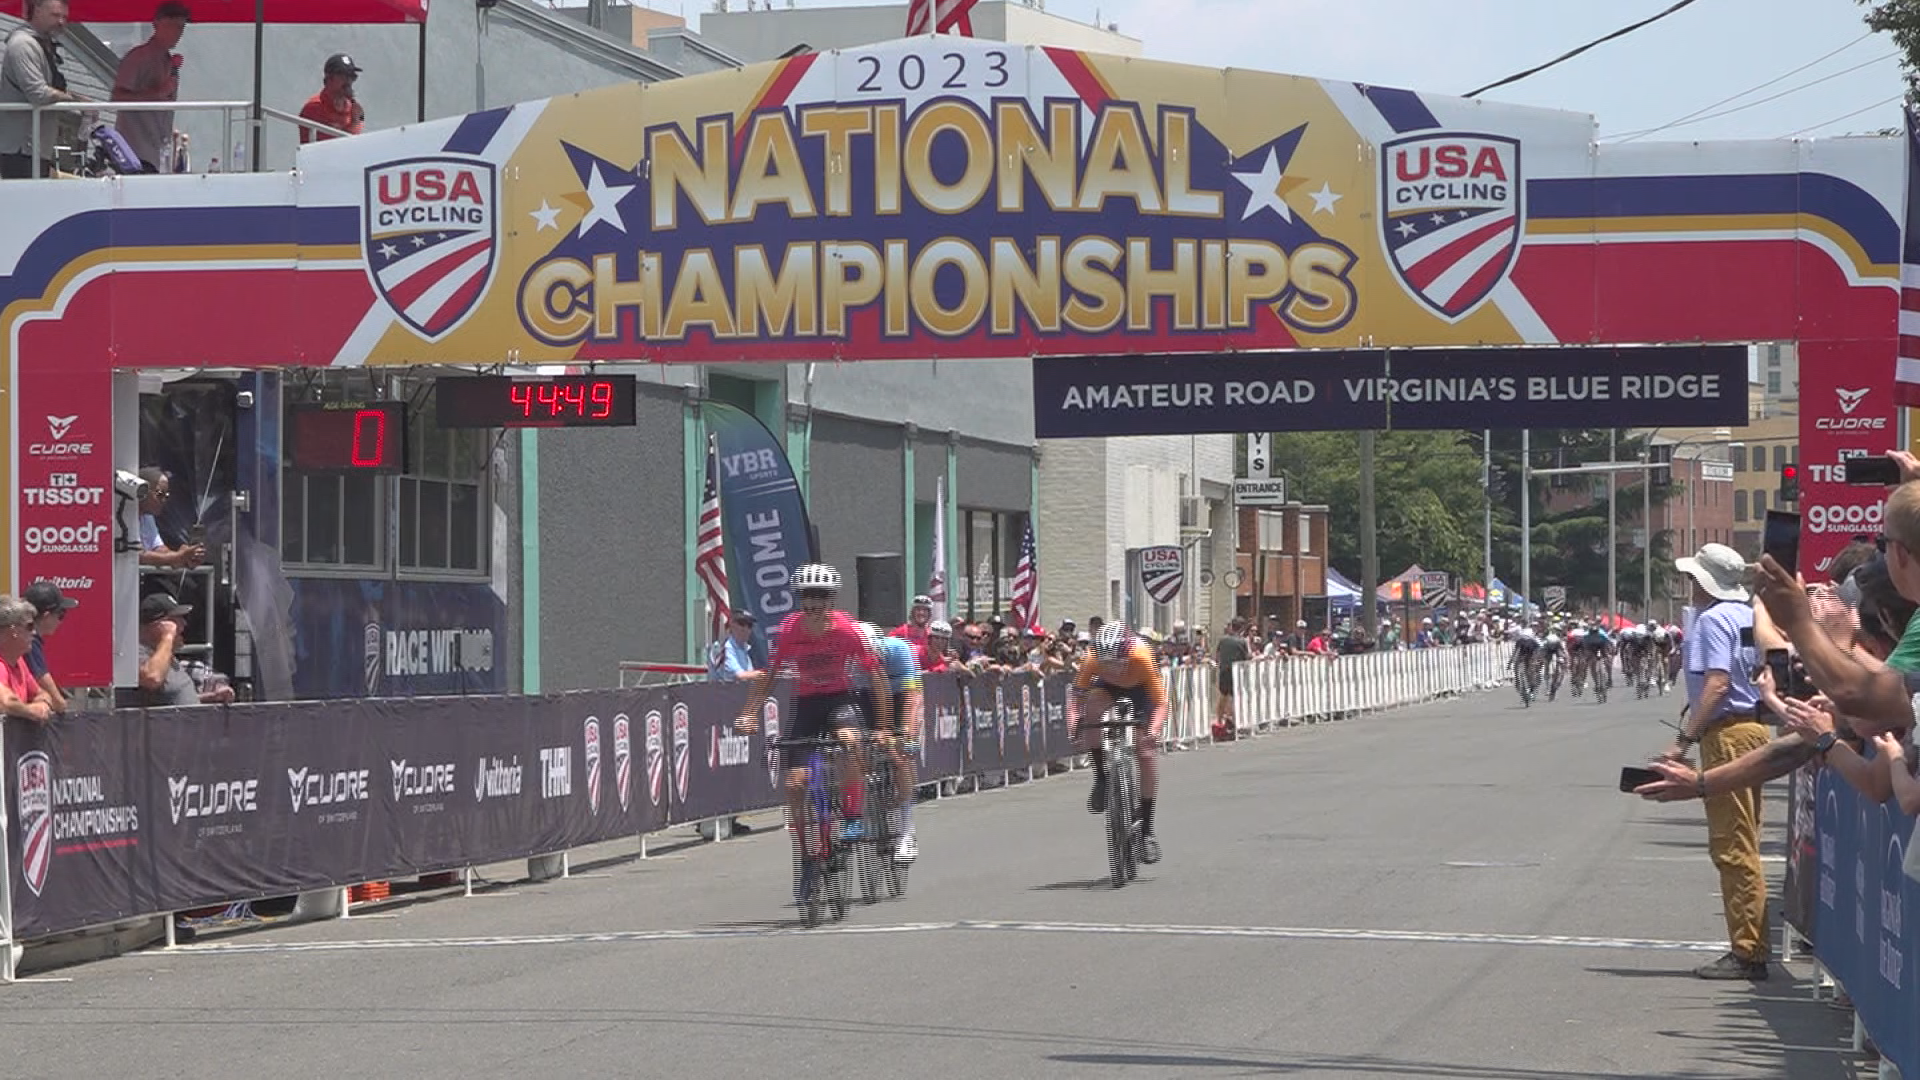 USA Cycling Amateur National Road Championships wraps up in Virginias Blue Ridge